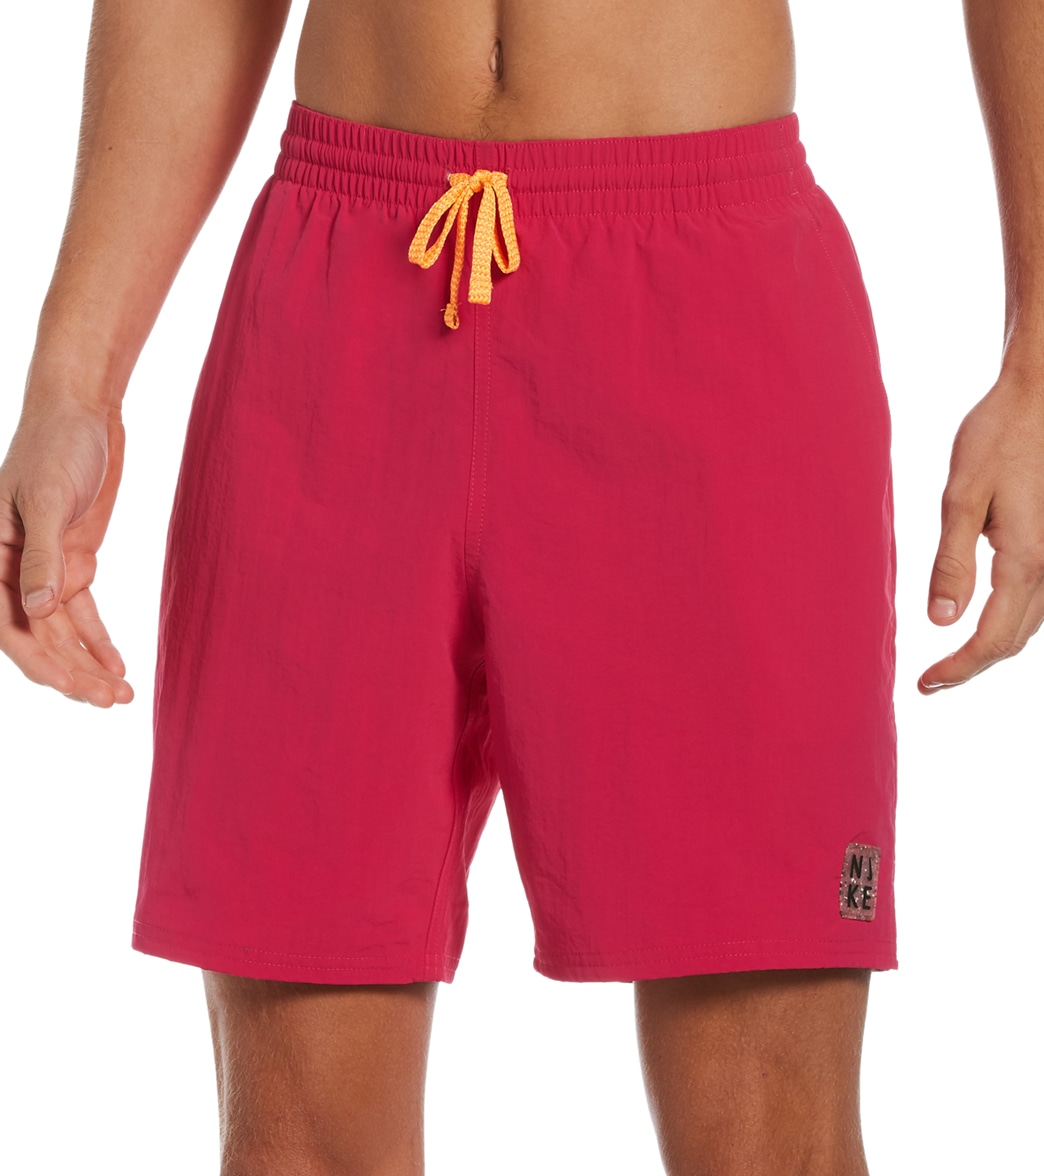 Nike Men's 18 Essential Volley Short - Fireberry Small - Swimoutlet.com